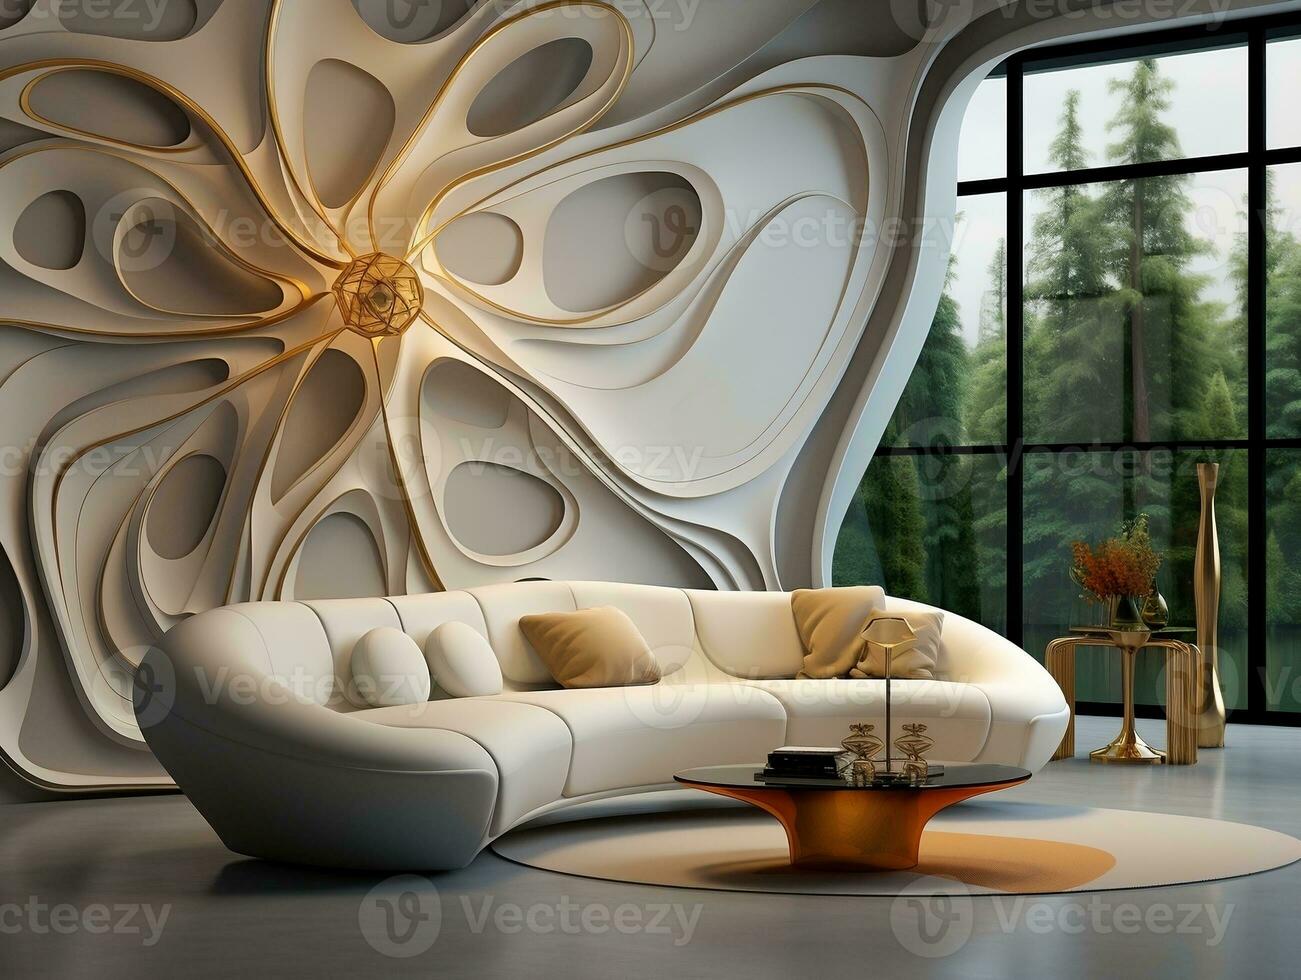 https://static.vecteezy.com/system/resources/previews/027/421/348/non_2x/modern-3d-abstraction-wallpaper-for-walls-luxury-golden-and-white-background-interior-home-mural-painting-wall-art-for-living-room-generative-ai-photo.jpeg